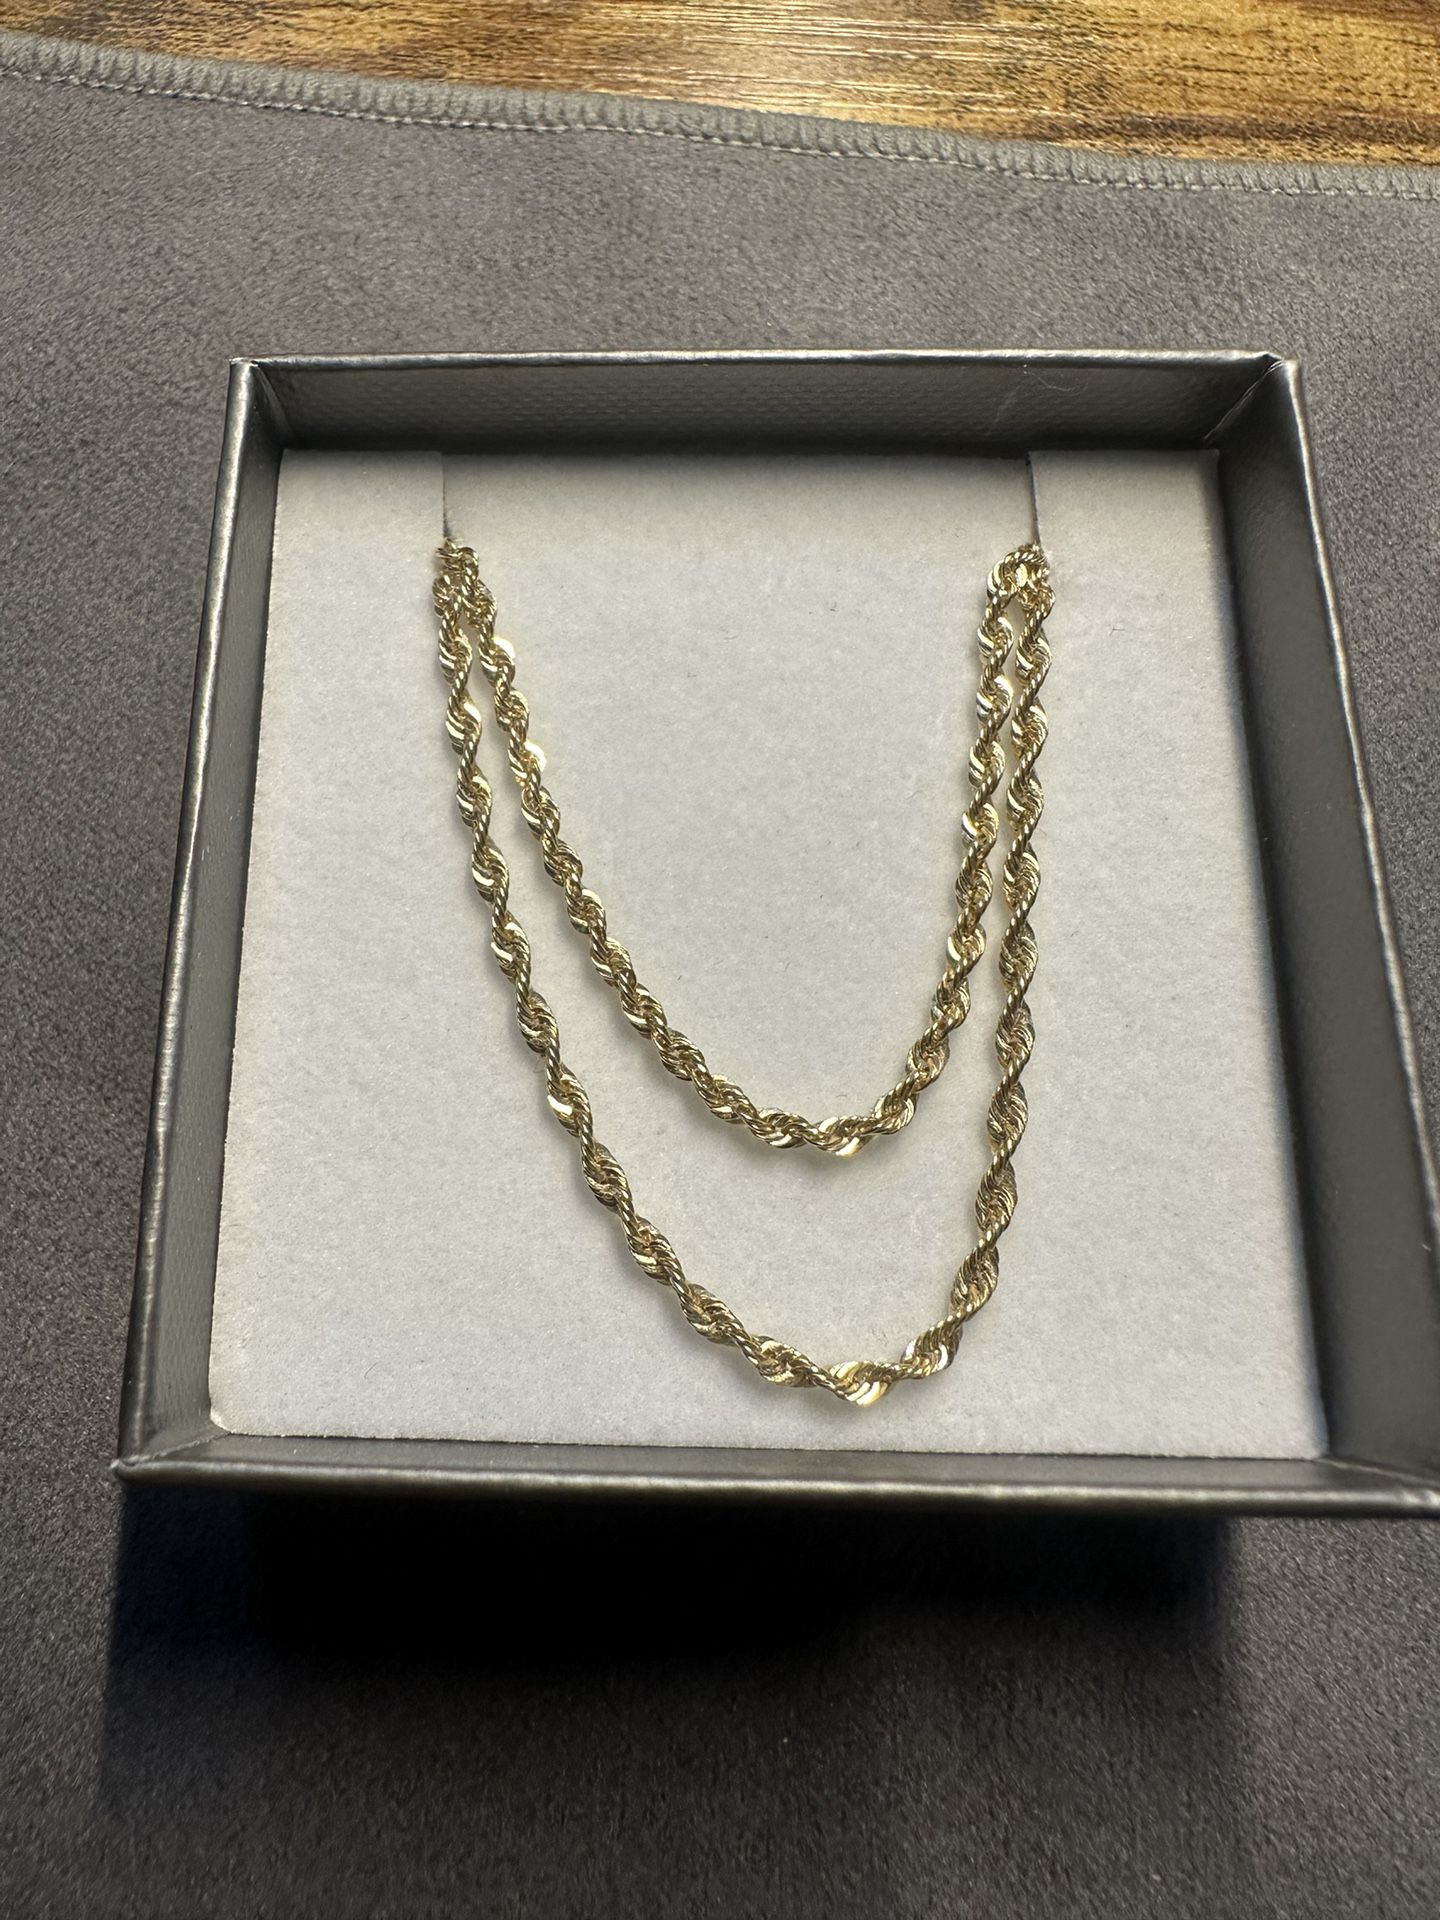 10k Real Gold 20” 2mm Rope Chain